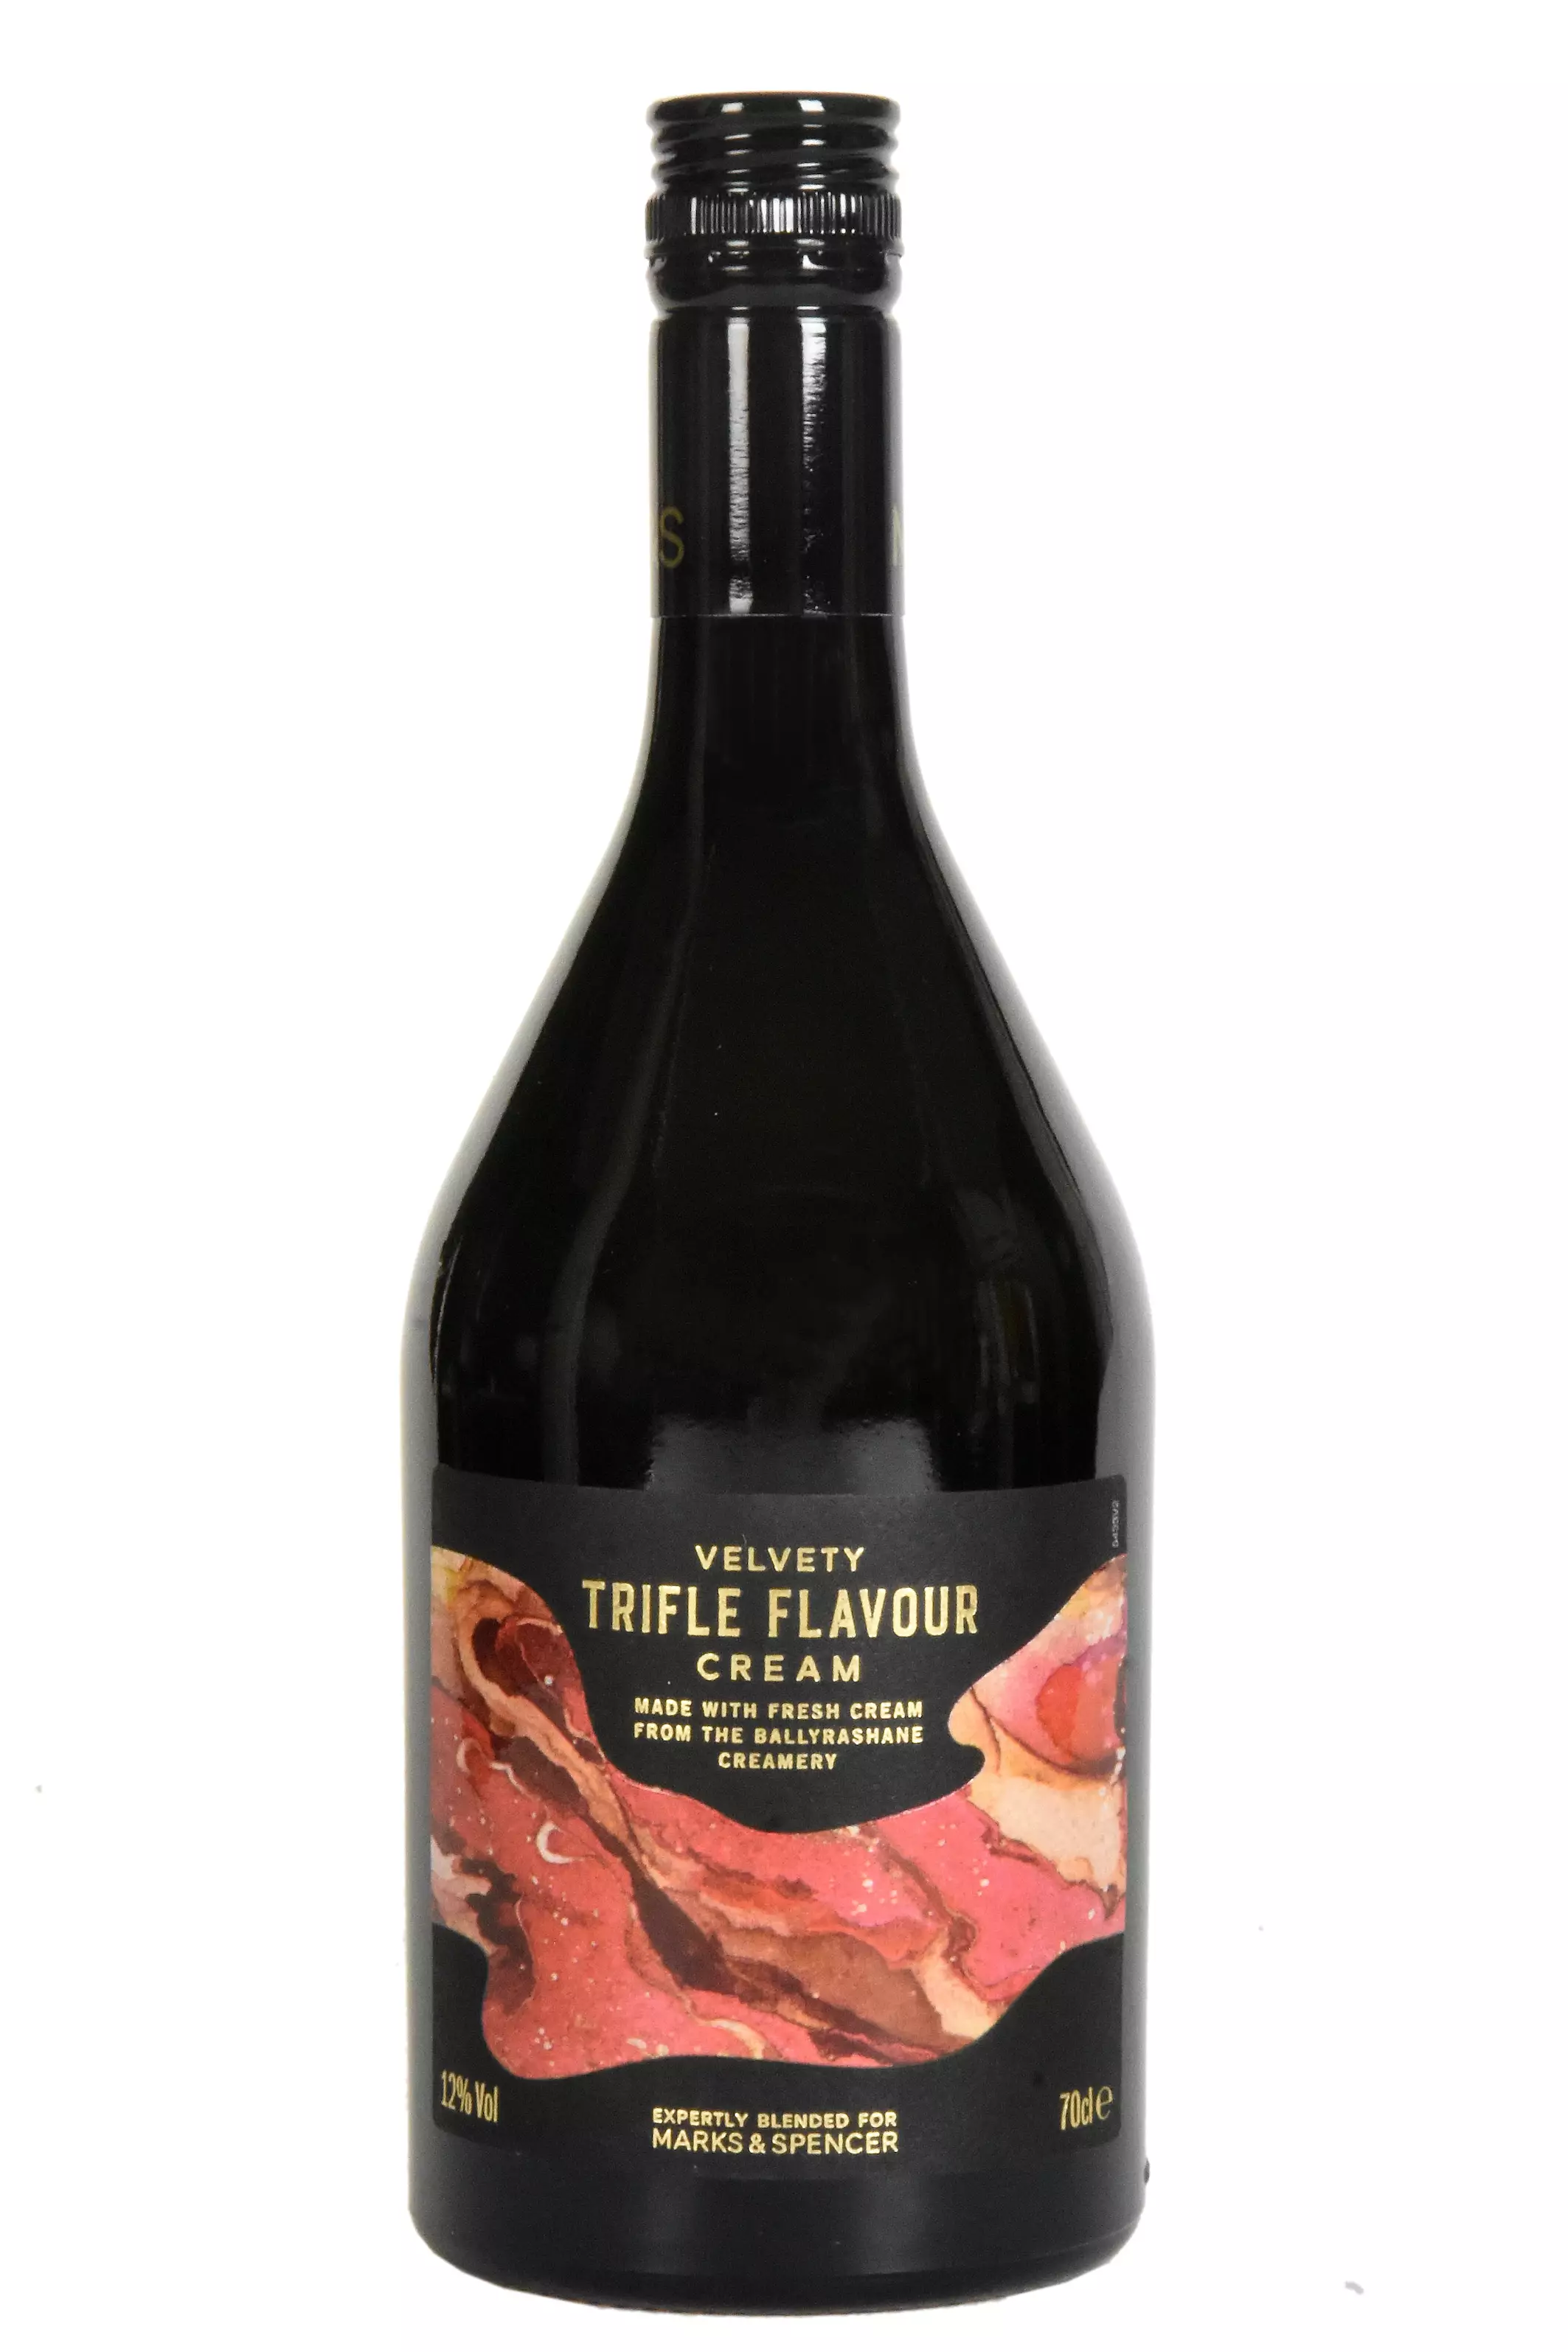 The Trifle Cream Liqueur is back in a new bottle (